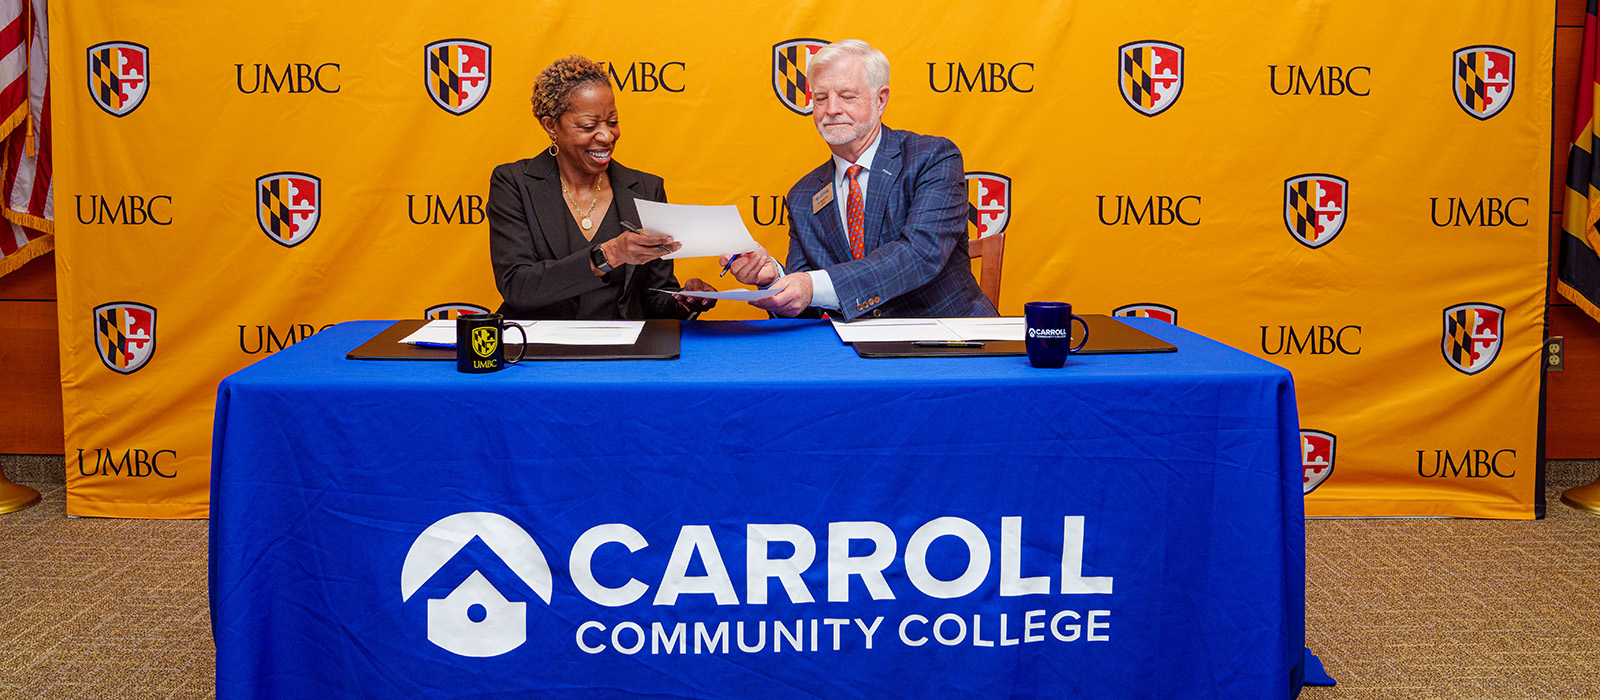 Carroll and UMBC transfer agreement signed Carroll Community College